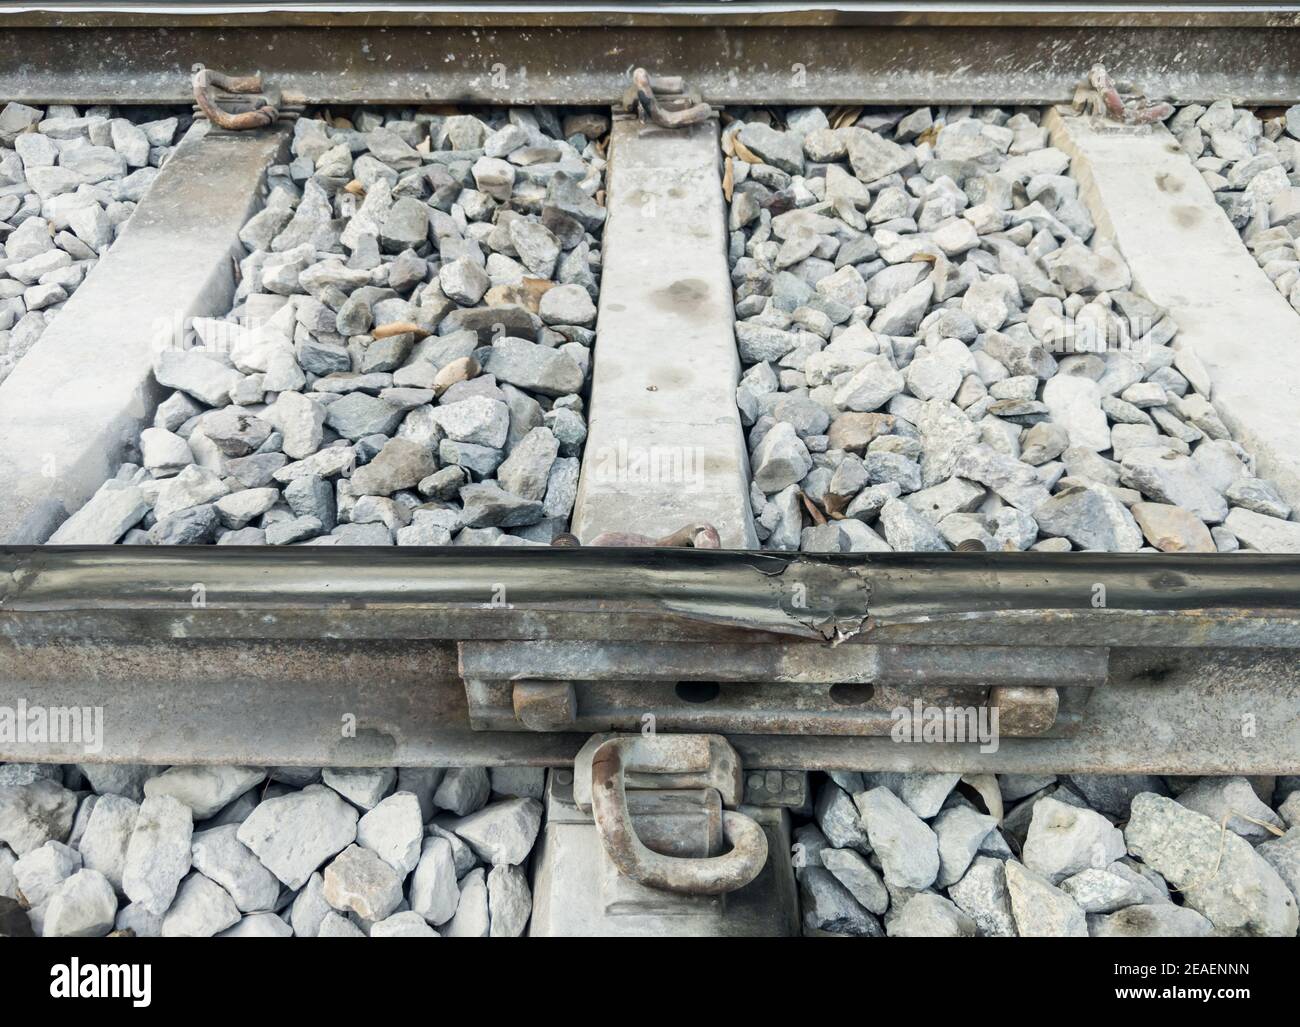 Broken railroad tracks at the inter-rail joints at risk of causing an accident, near the station in the city, front view with the copy space. Stock Photo